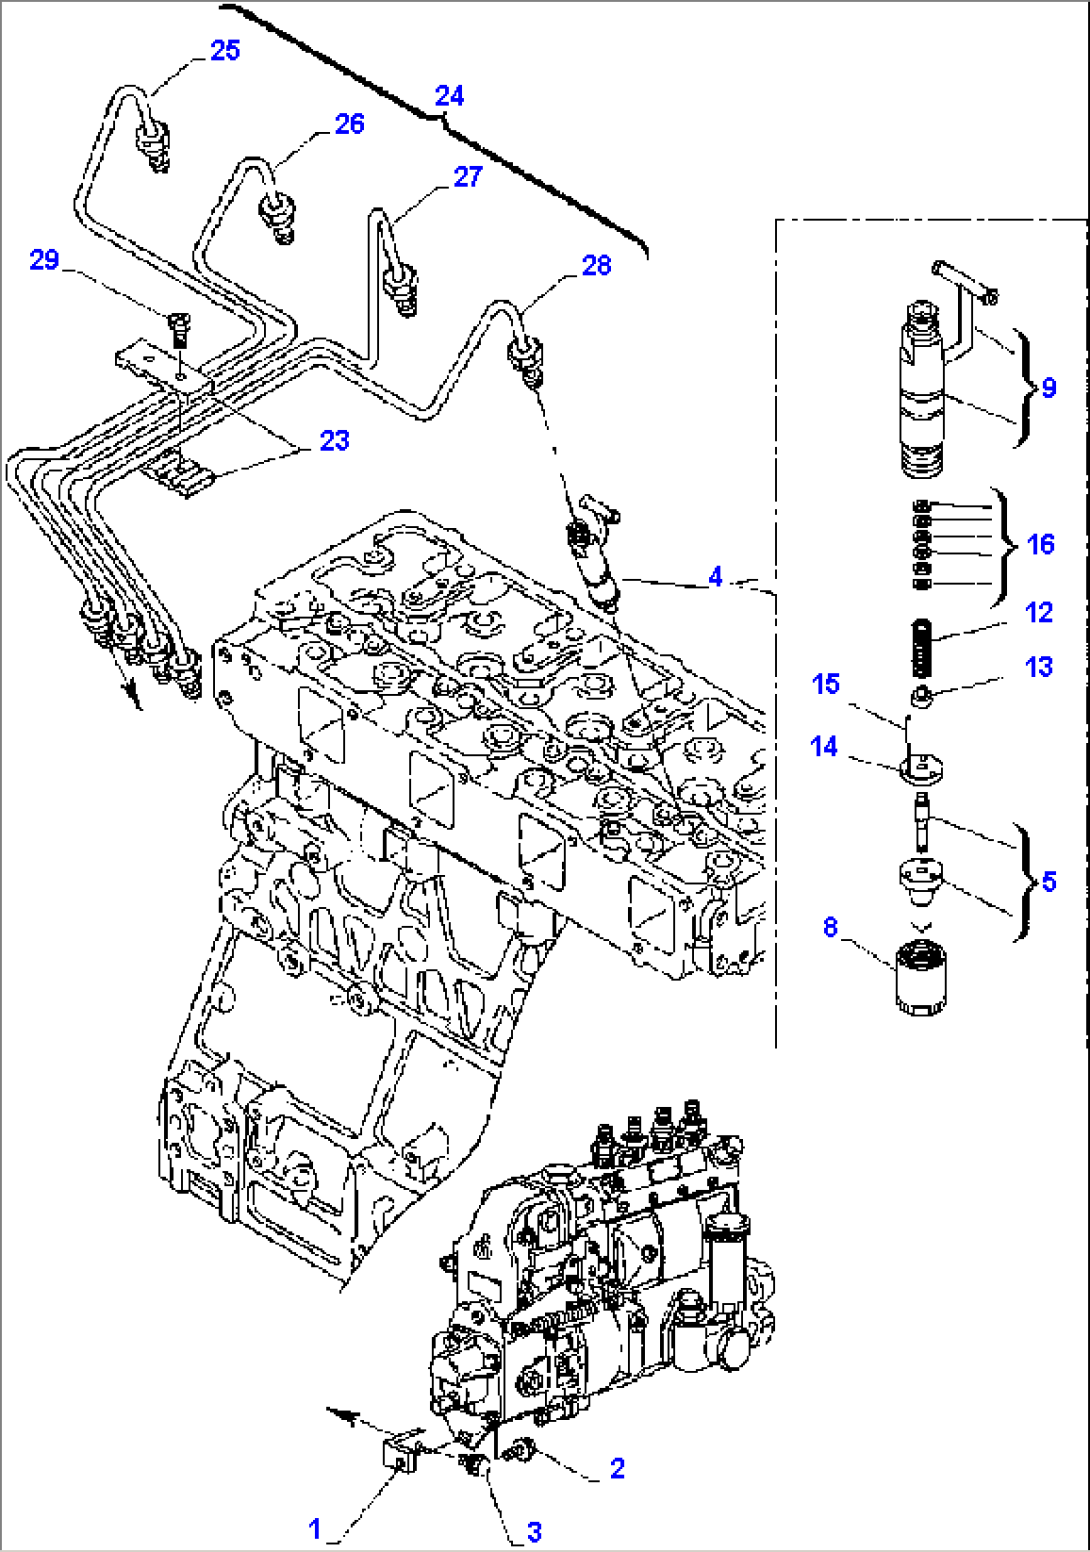 FIG. A0426-01A0 FUEL INJECTION VALVE - TURBO ENGINE